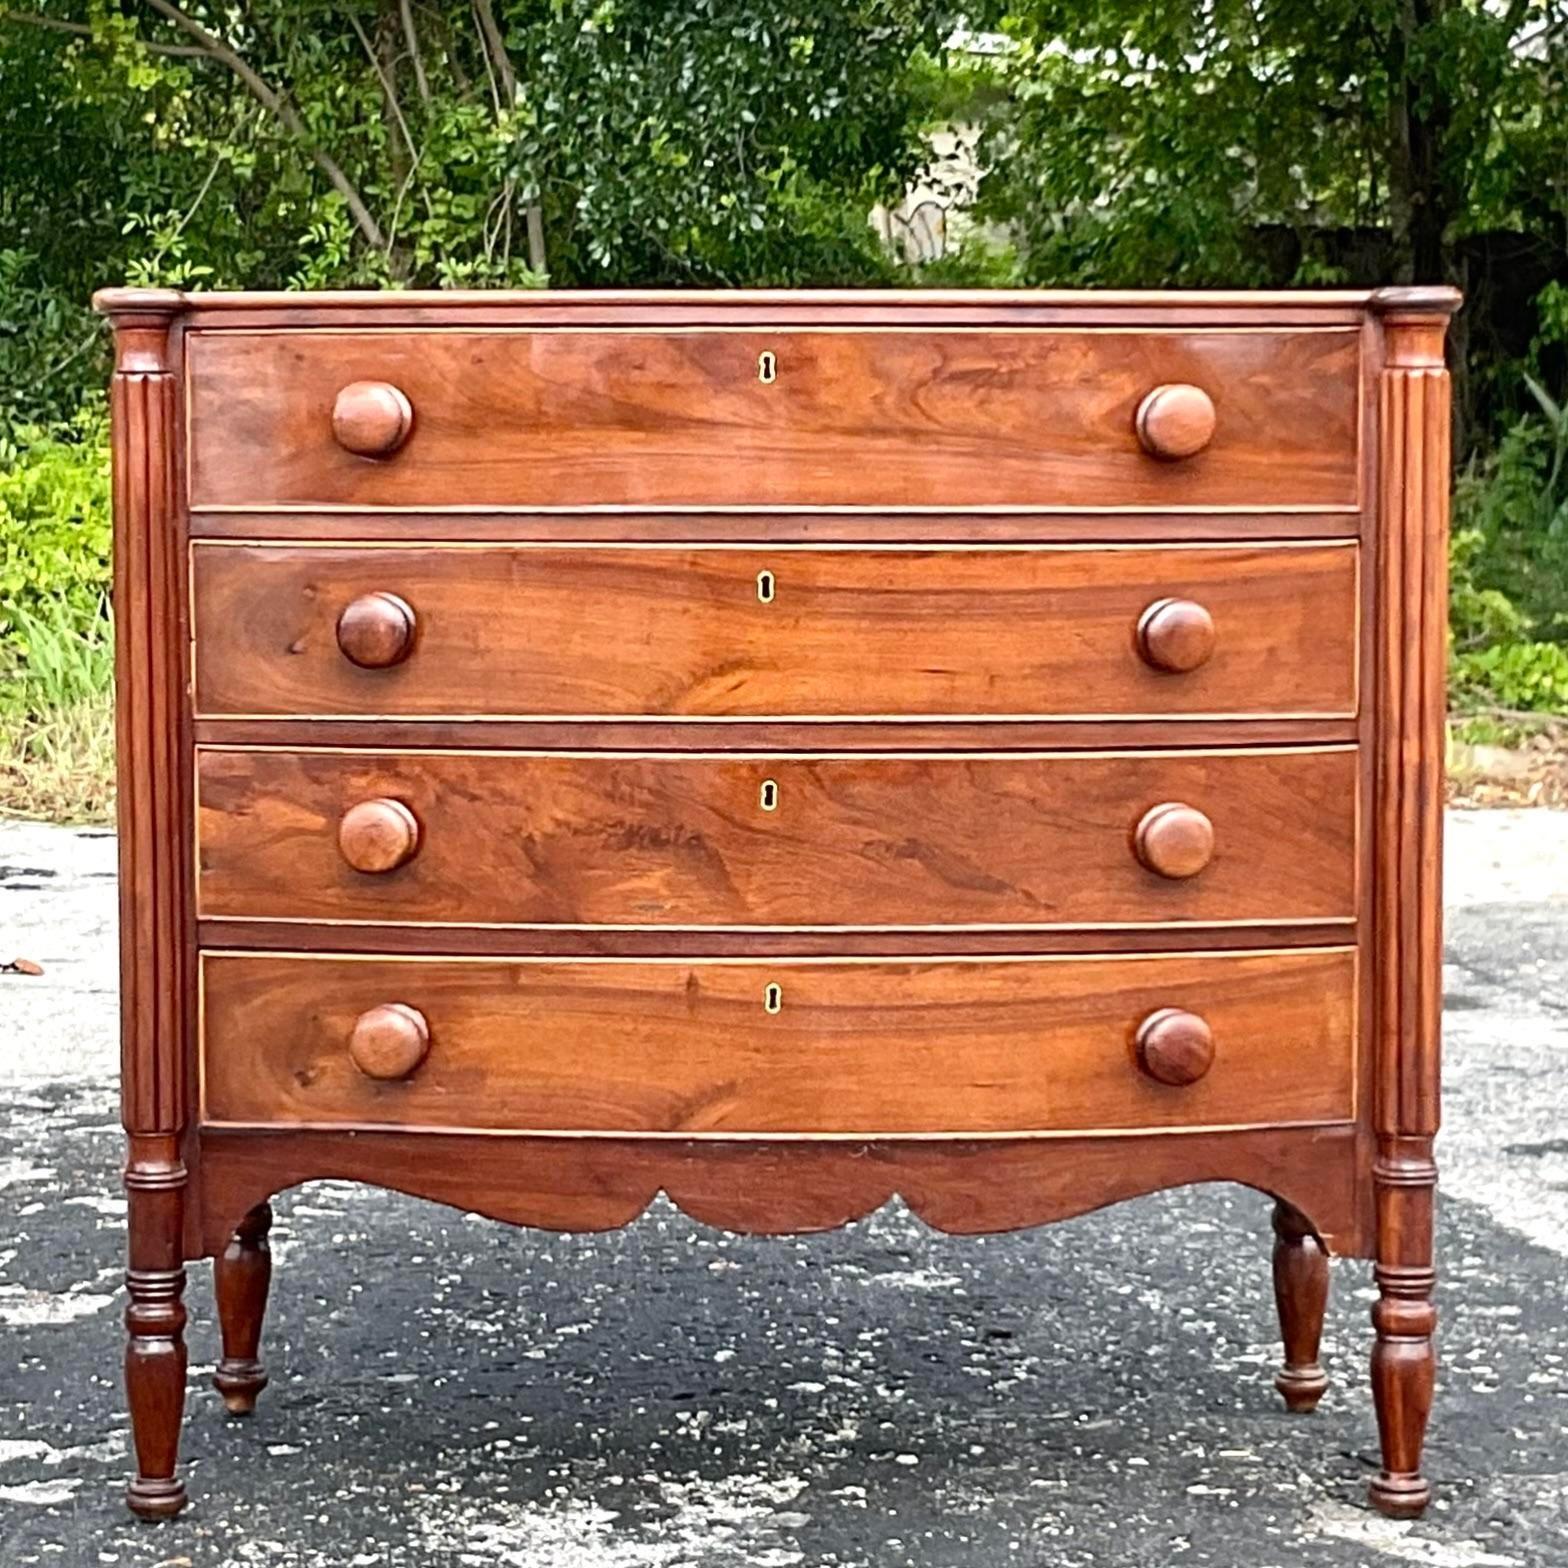 British Vintage Regency Bow Front English Mahogany Chest of Drawers For Sale